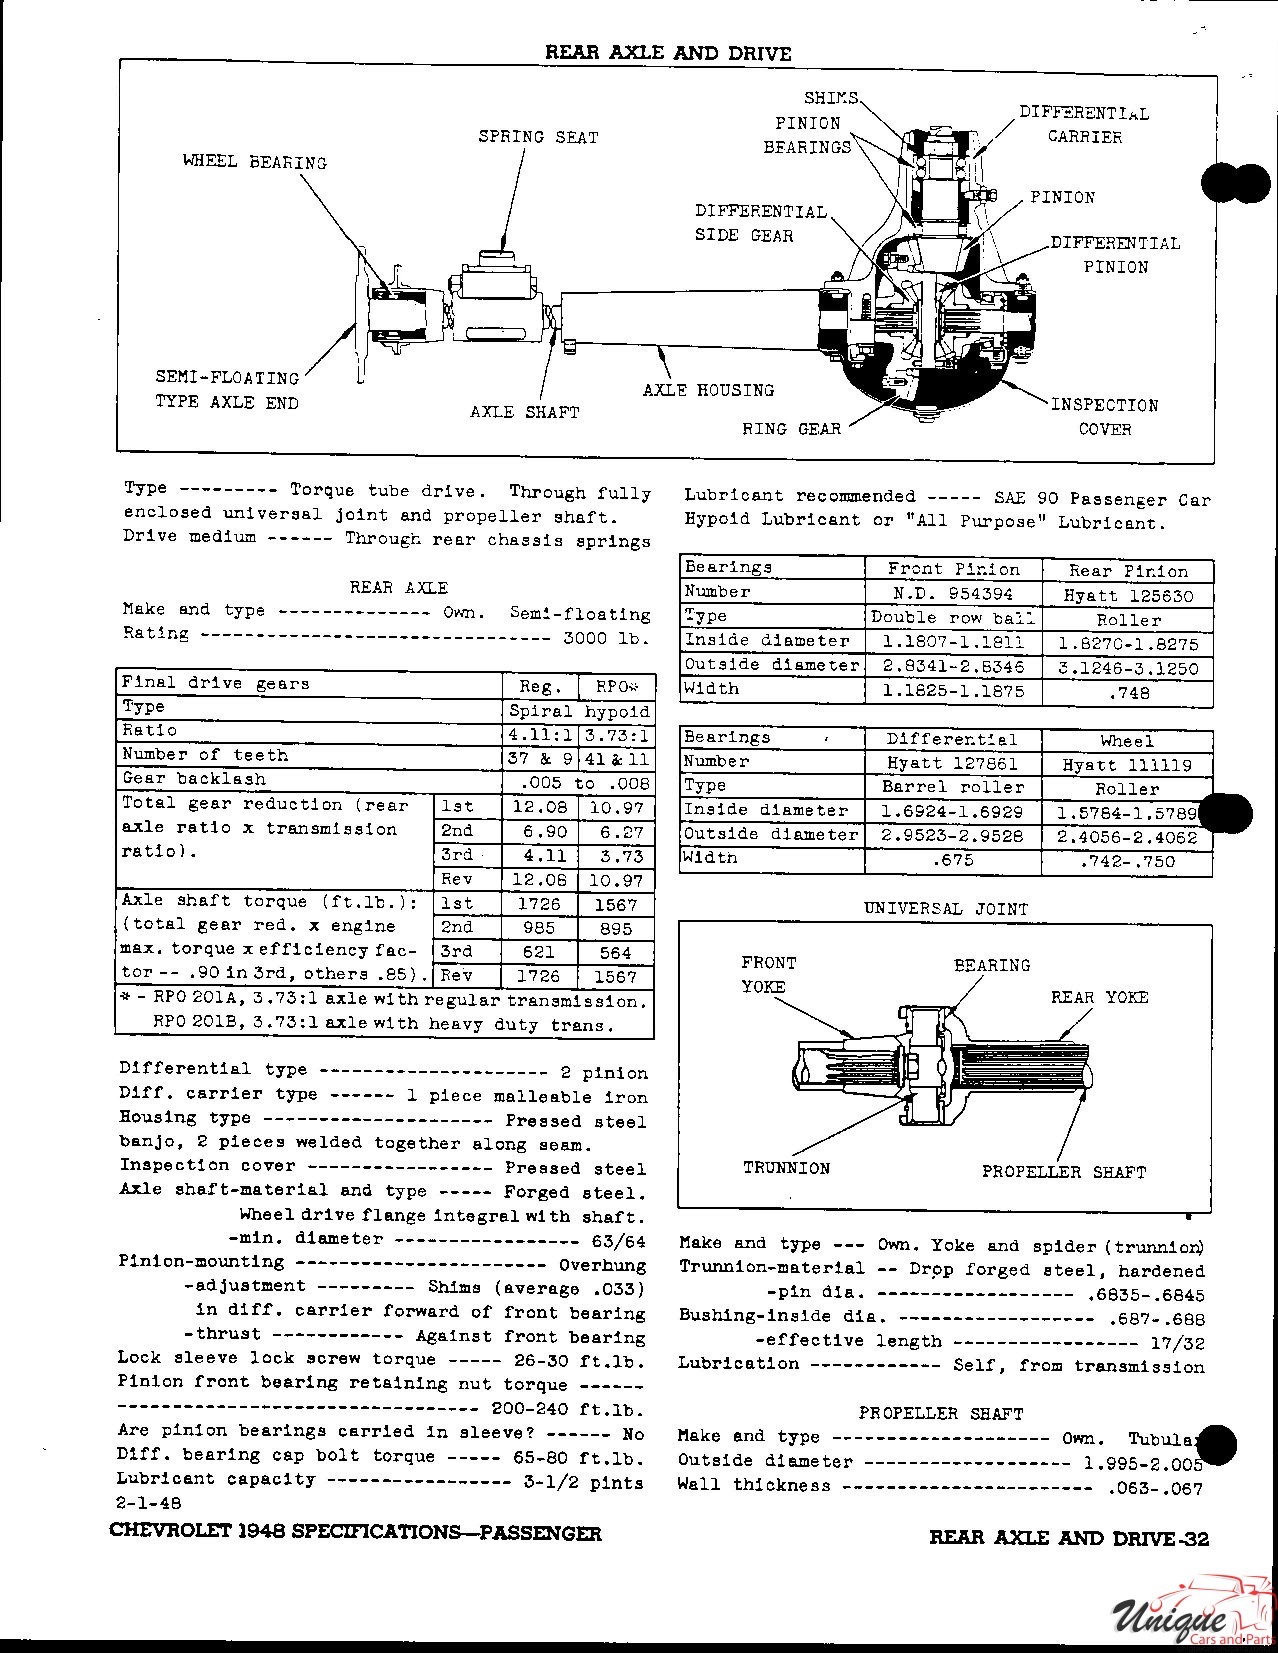 1948 Chevrolet Specifications Page 29